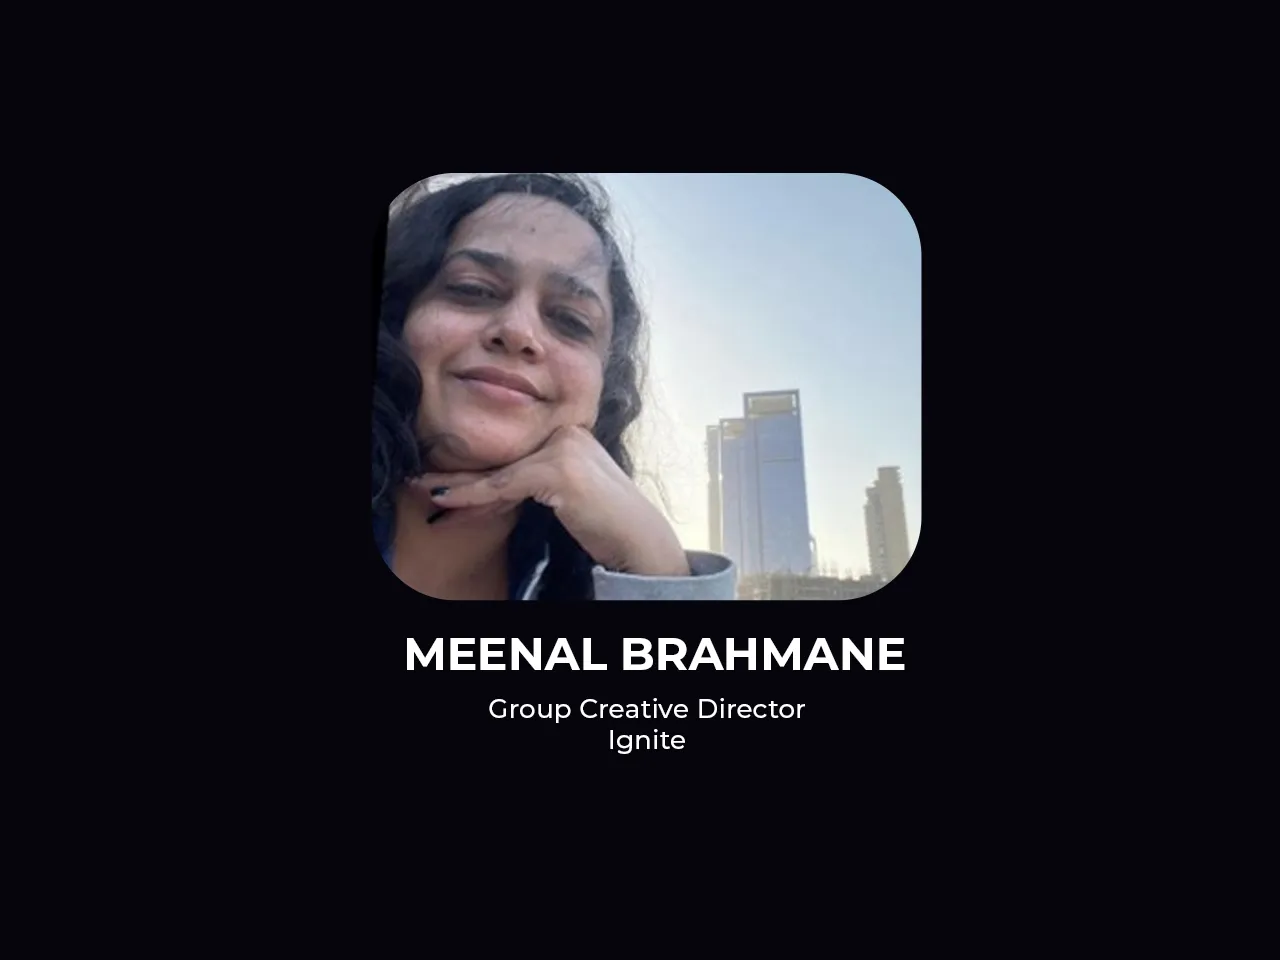 Meenal Brahmane joins Tribes Communication as Group Creative Director at Ignite